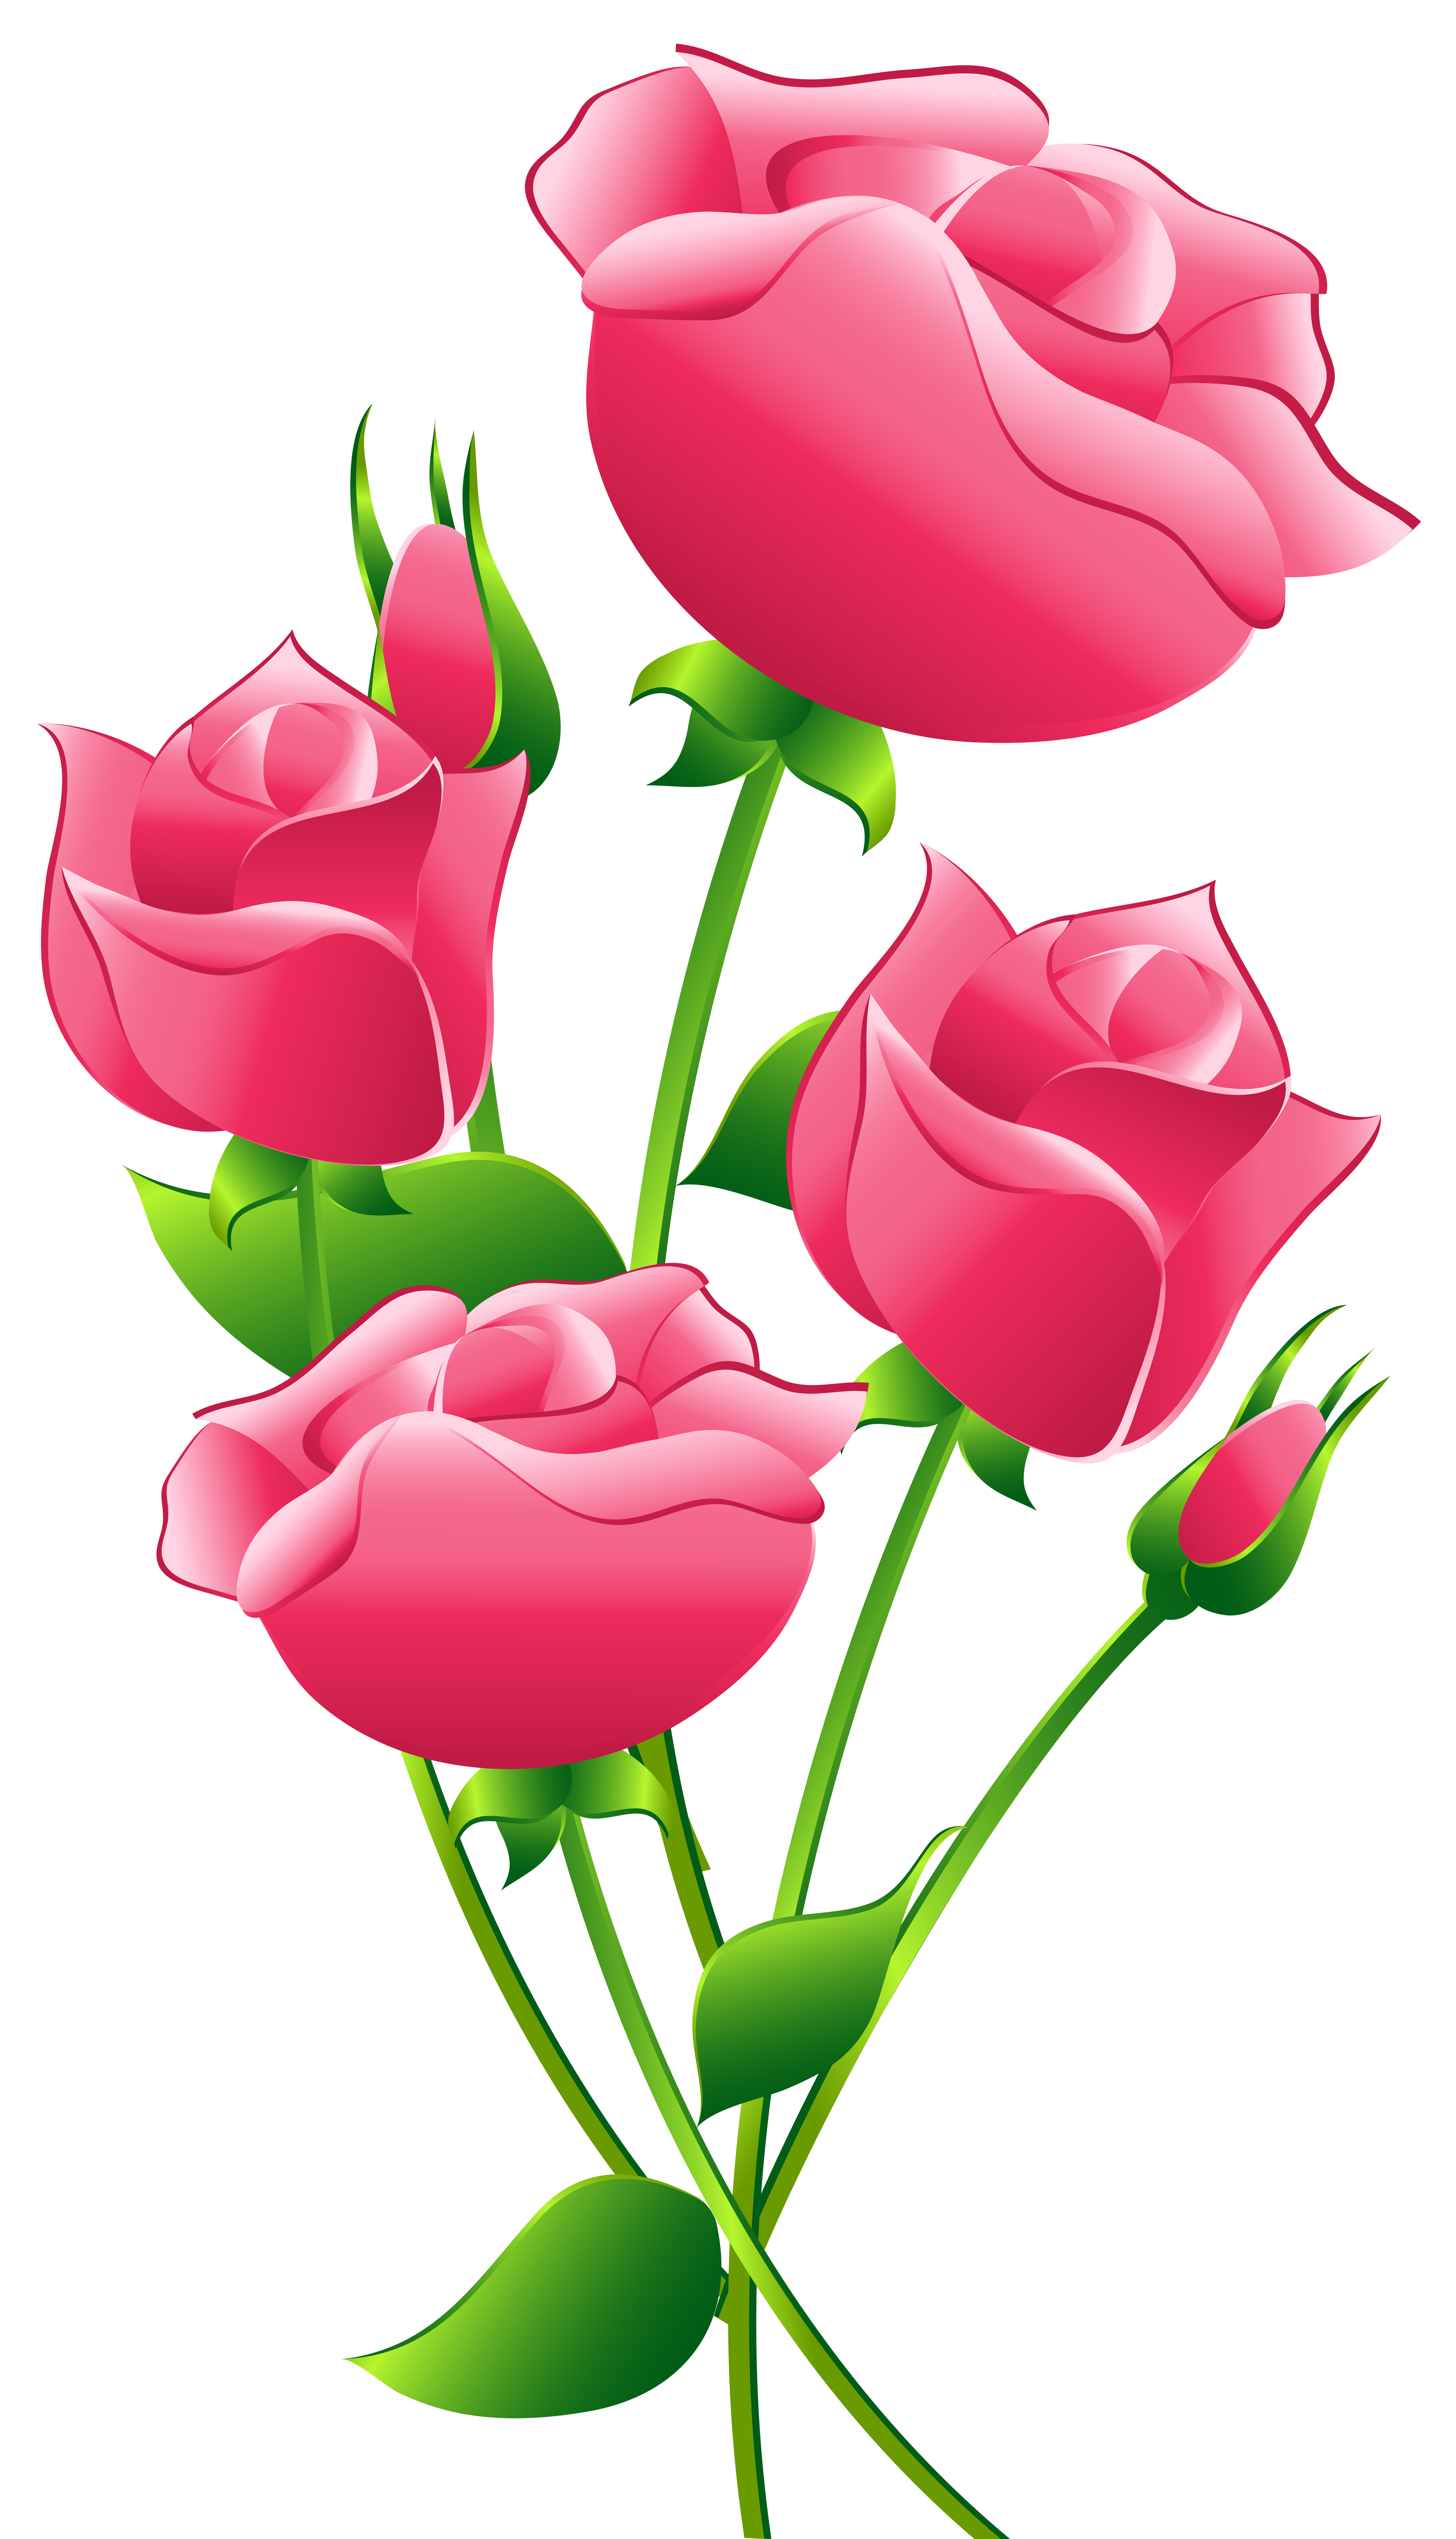 Pink Clip Art Rose Clipart Pa